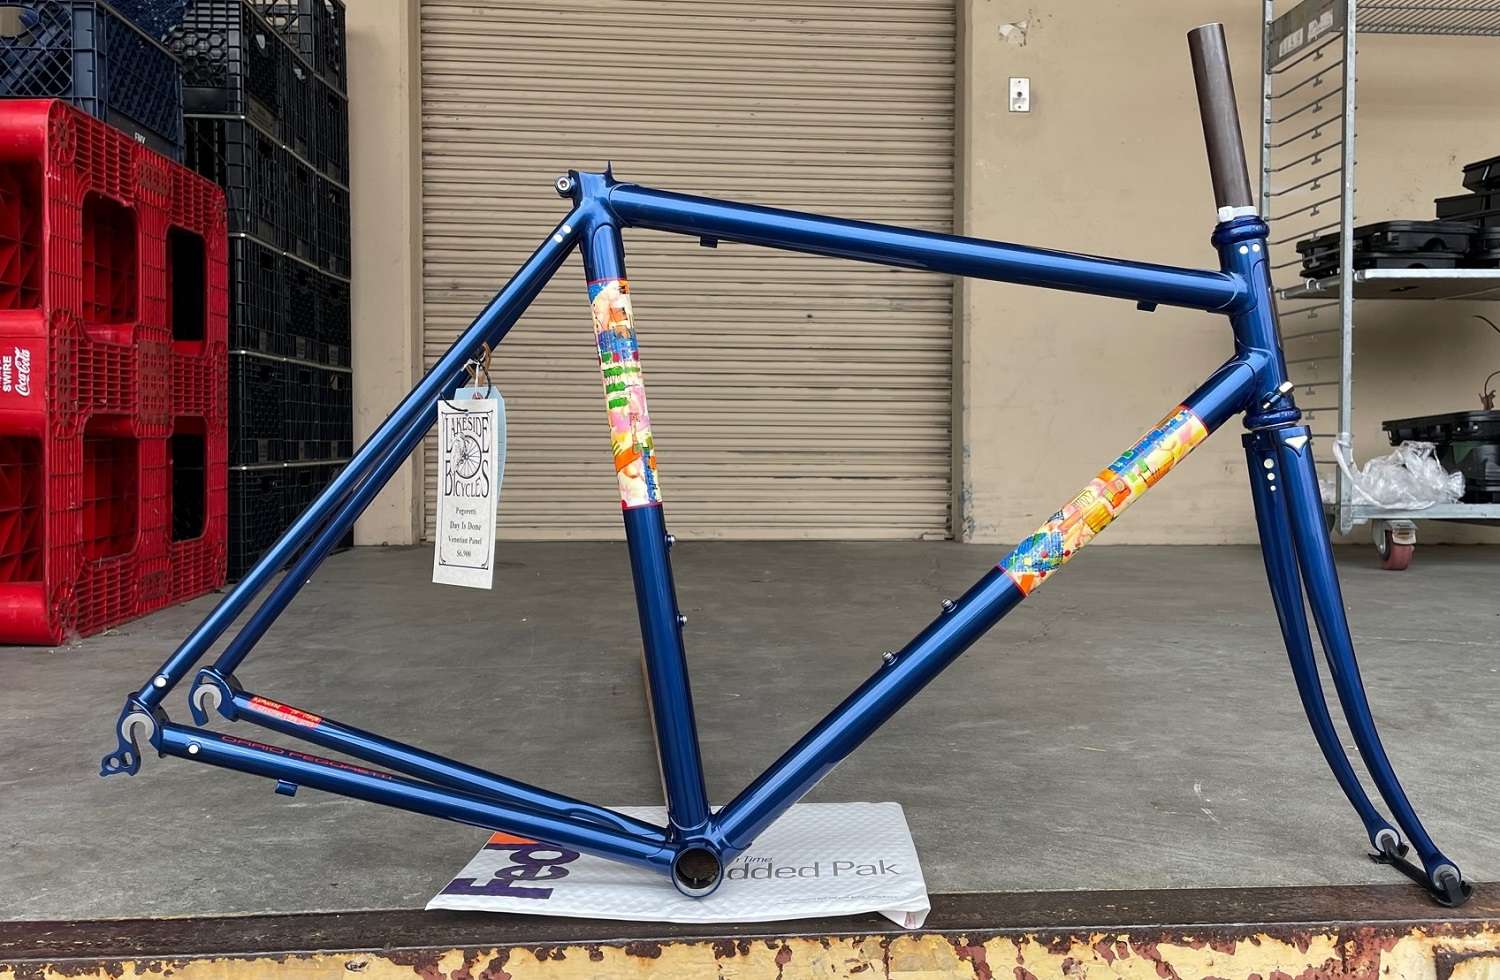 53cm Pegoretti Day Is Done with Pegoretti Steel Fork and matching Chris King headset, $6,900